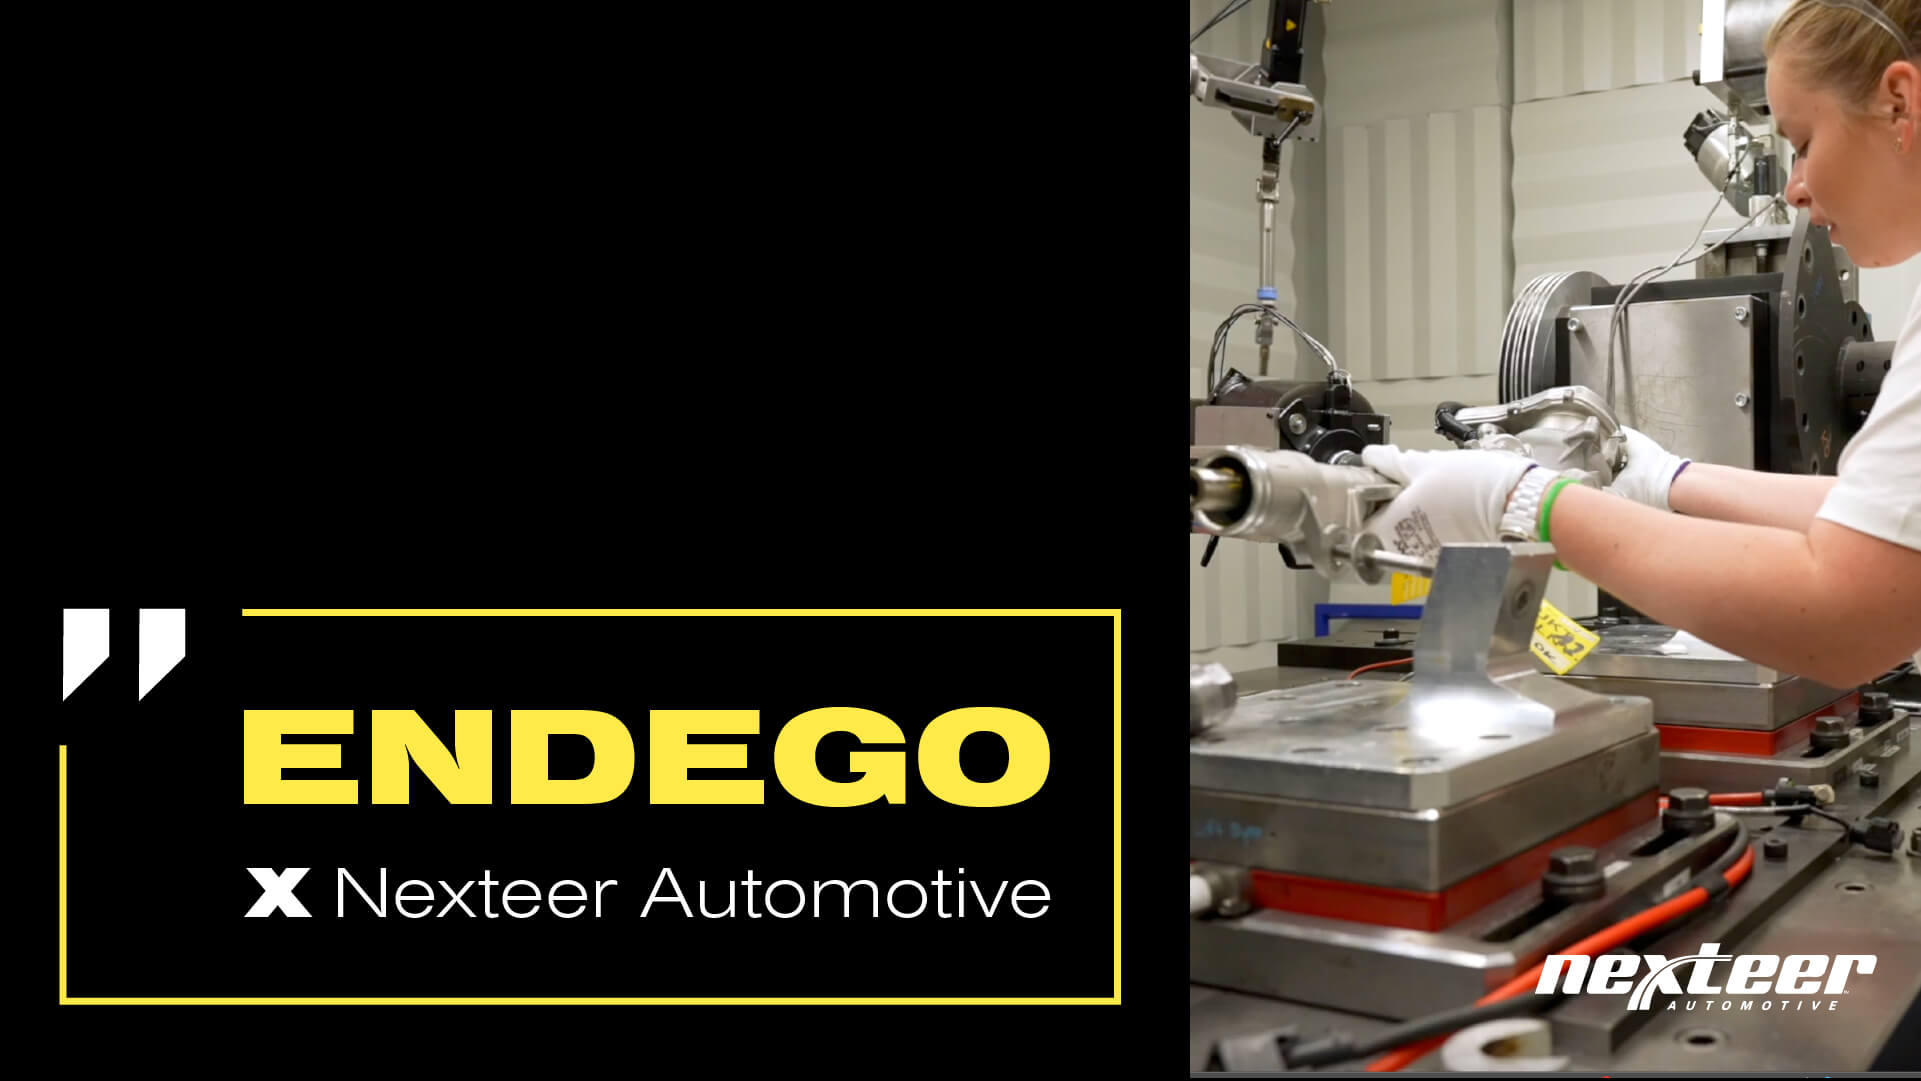 Steering Into the Future with Nexteer Automotive